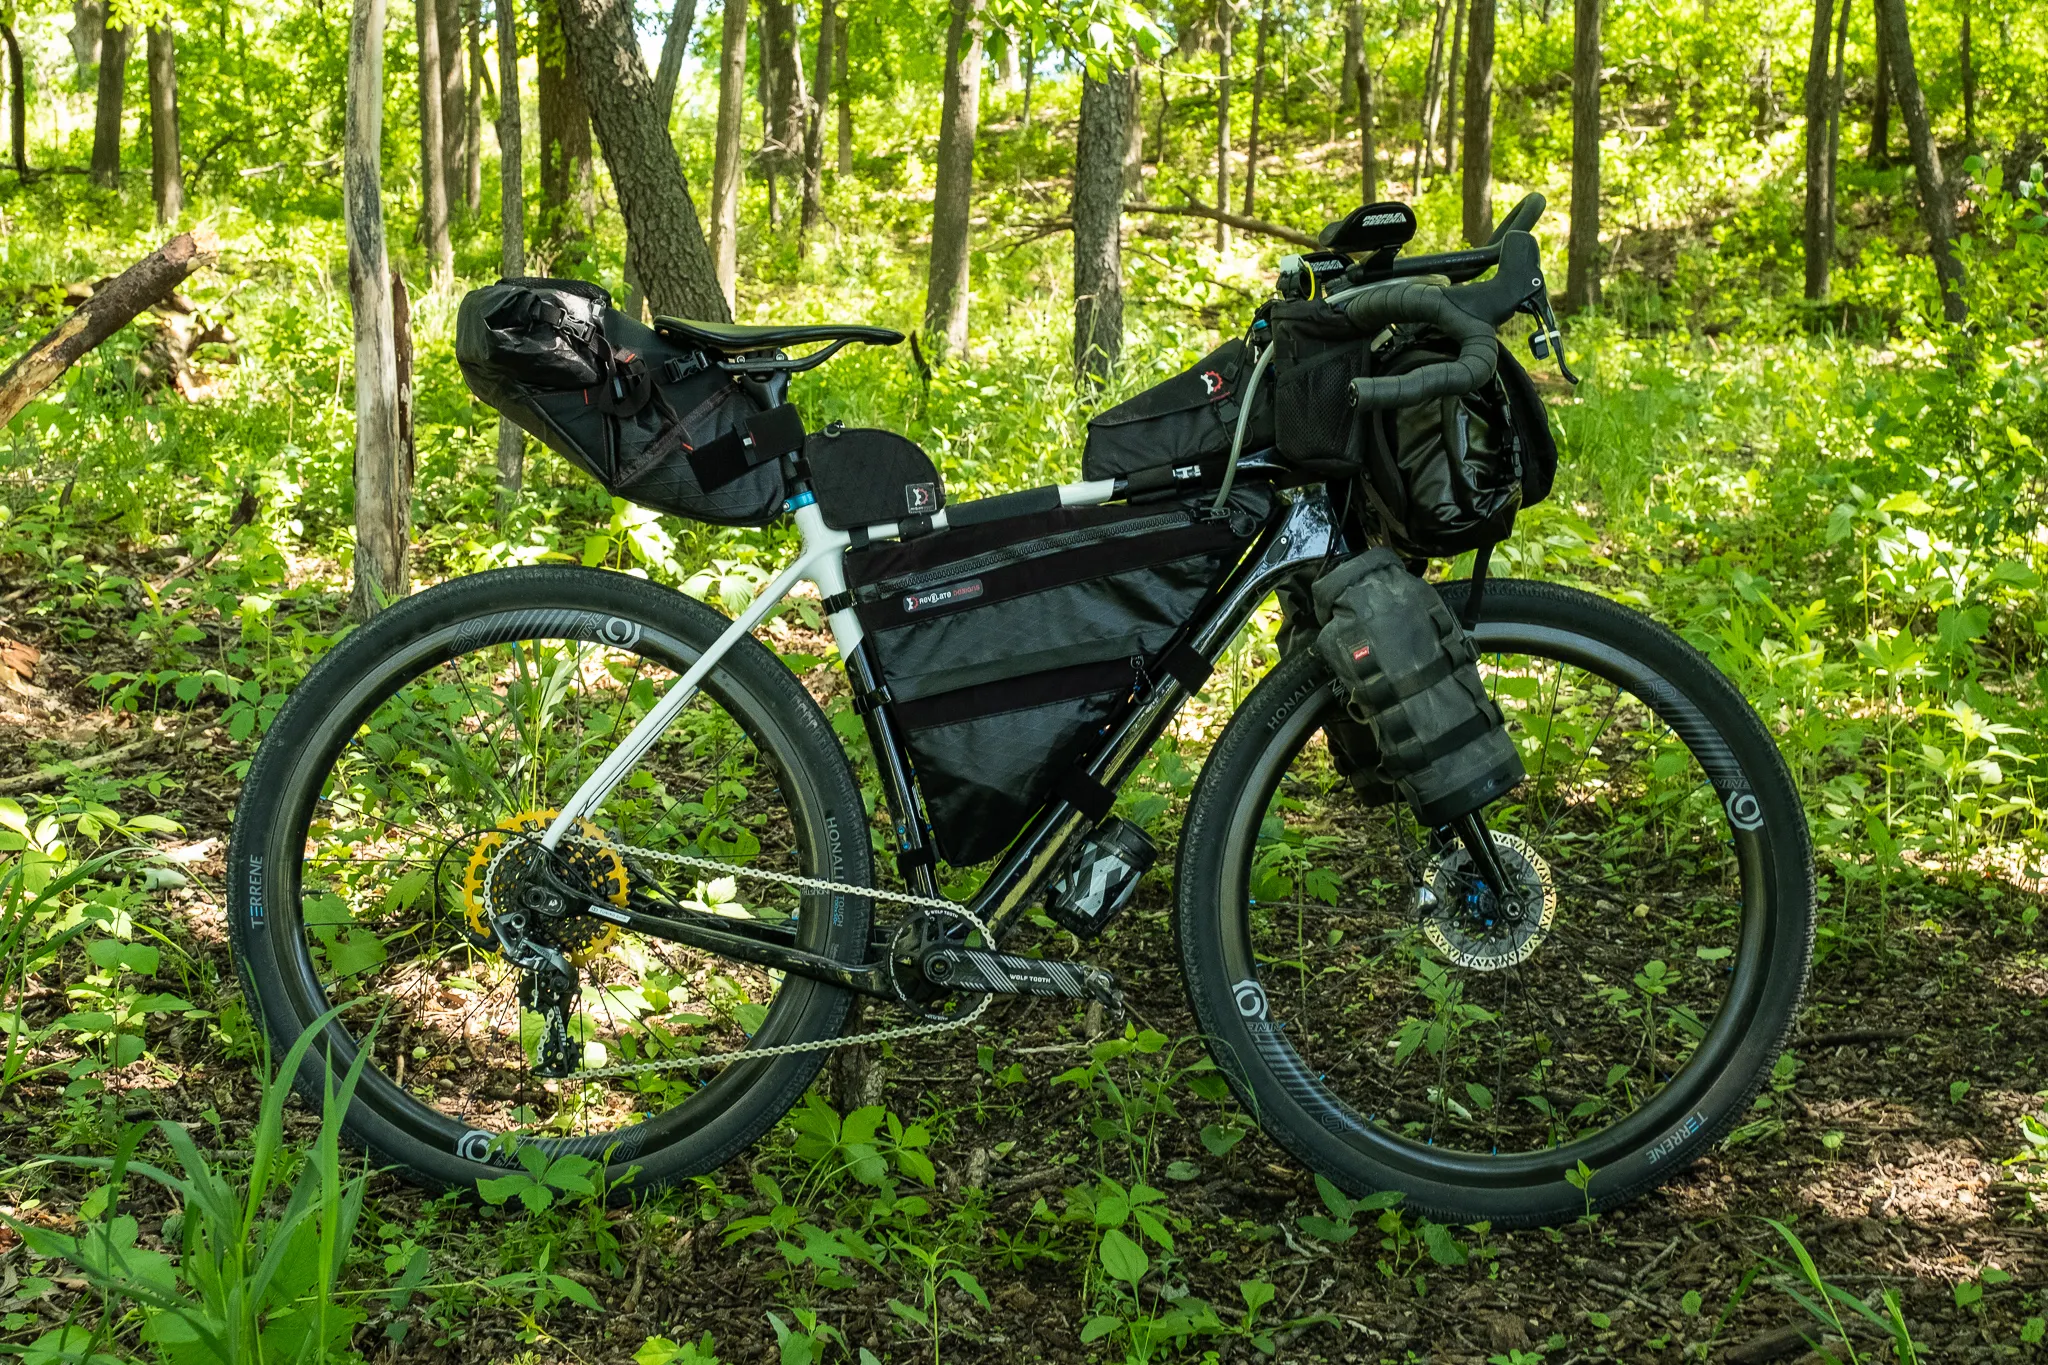 A Waheela C prepped to bikepack the Tour Divide 2021. It is outfitted with a  number of bikepacking bags and is posed in a lush forest.